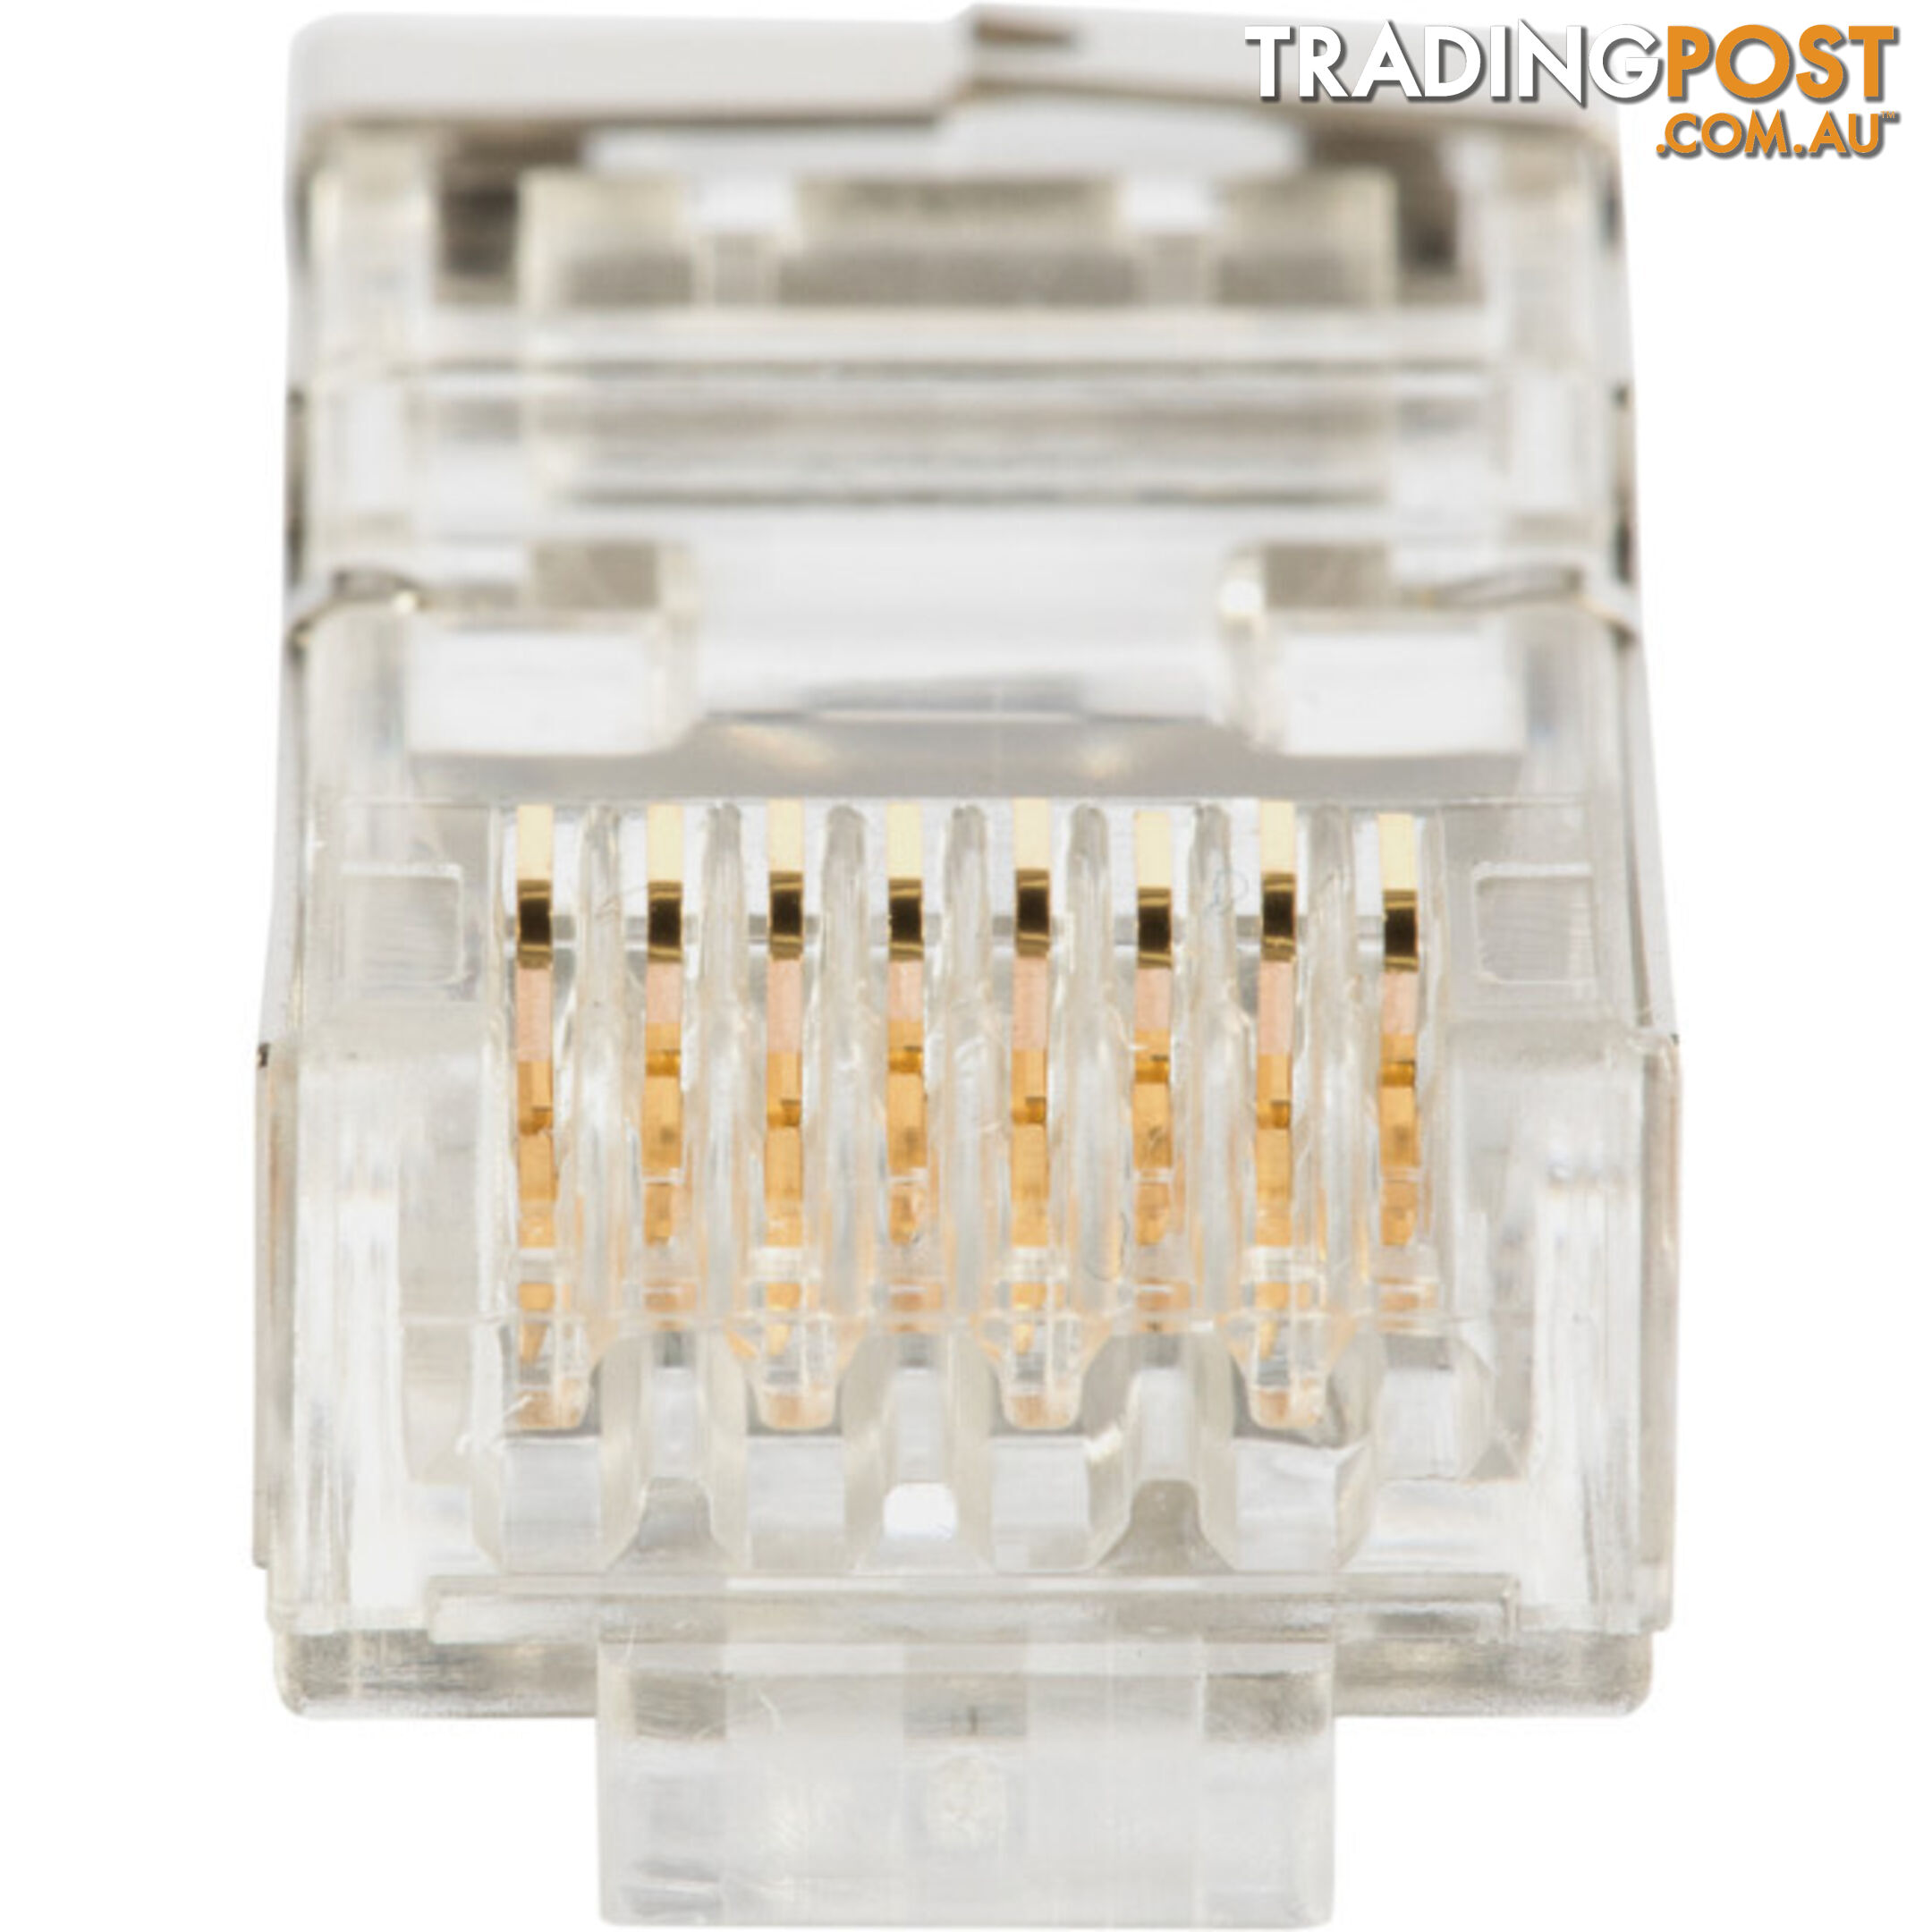 T3SPSC6S-50 STP CAT6A/6 SOLID SNAP PLUG WITH COPPER STRIP RJ45 SHIELDED 1.2MM PACK OF 50